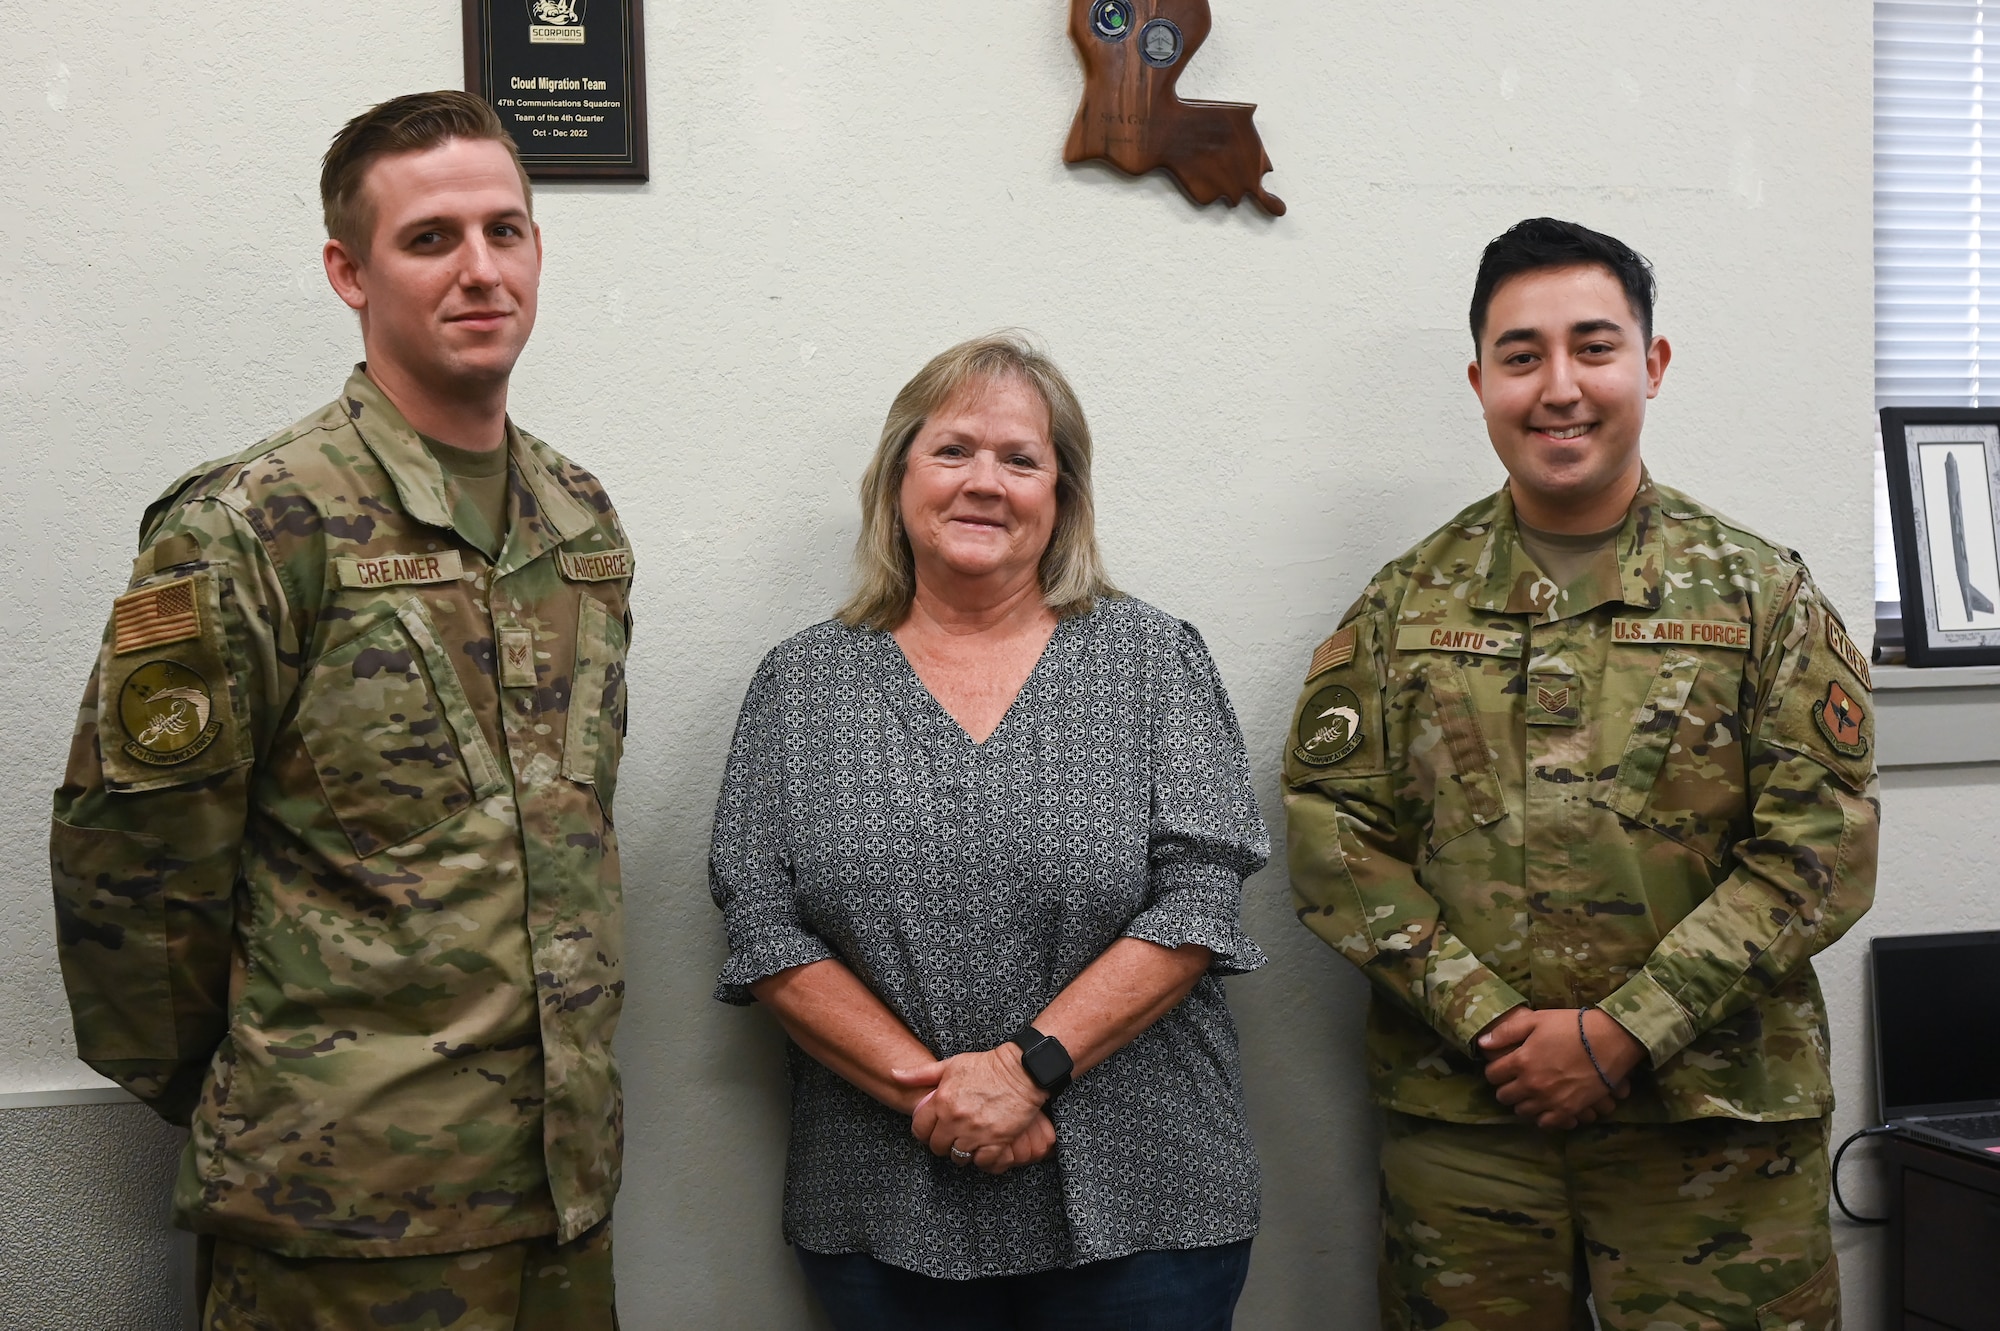 U.S. Air Force Senior Airman Zain Creamer (left), 47th Communications Squadron knowledge management technician, Alice Harlan (middle), 47th Communications Squadron base records manager, and Staff Sgt. Gustavo Cantu (right), 47th Communications Squadron knowledge management technician, pose for a Knowledge Management team photo at Laughlin Air Force Base, Texas, on April 17, 2023. The Air Force Records Management Program involves managing the creation, use, and disposition of records, including the preservation of important information and the disposal of records of temporary value. (U.S. Air Force photo by Airman 1st Class Keira Rossman)